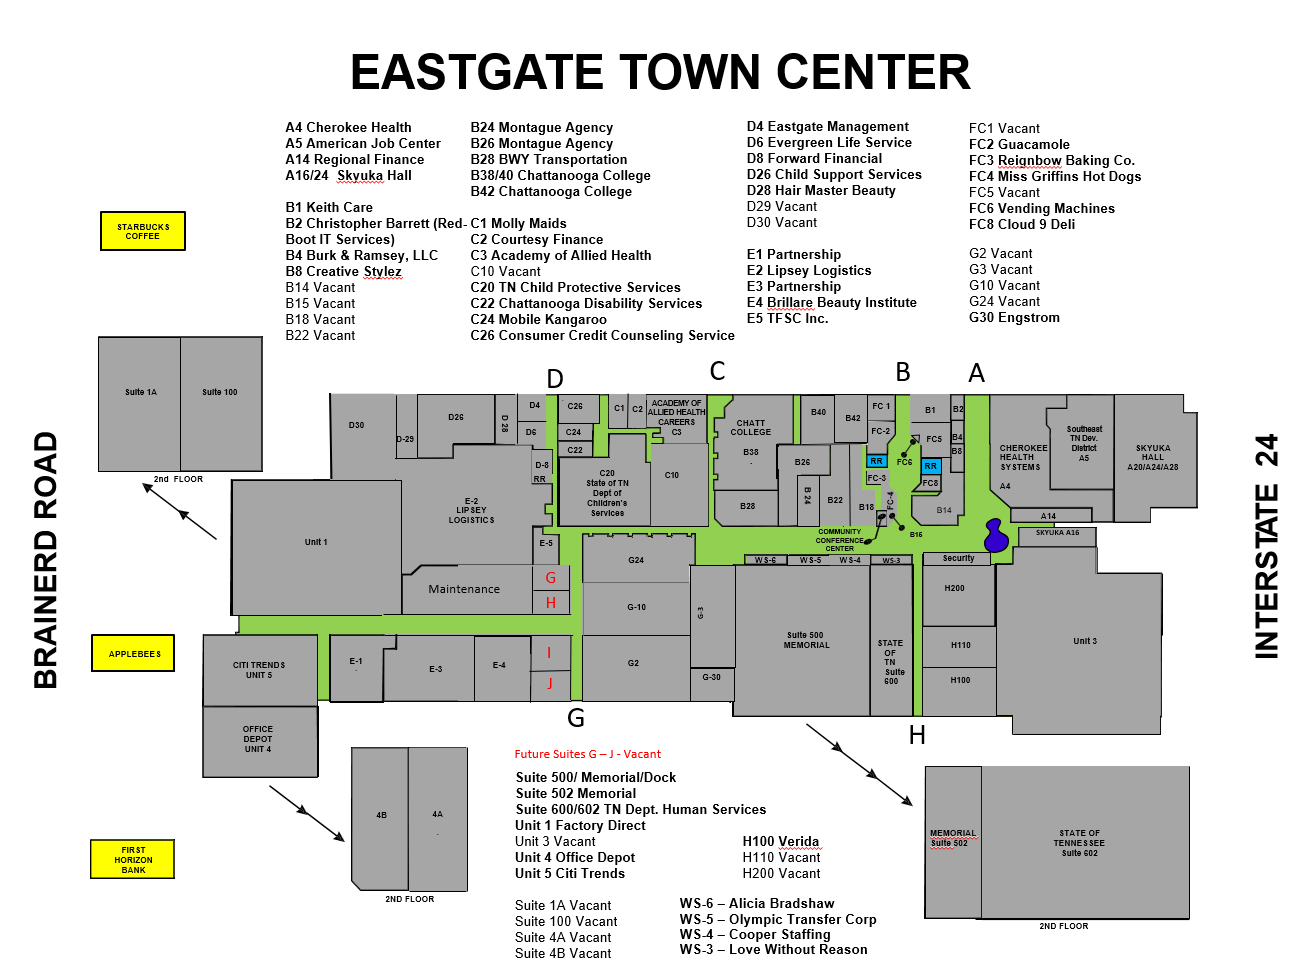 Eastgate Town Center - Facilities Layout